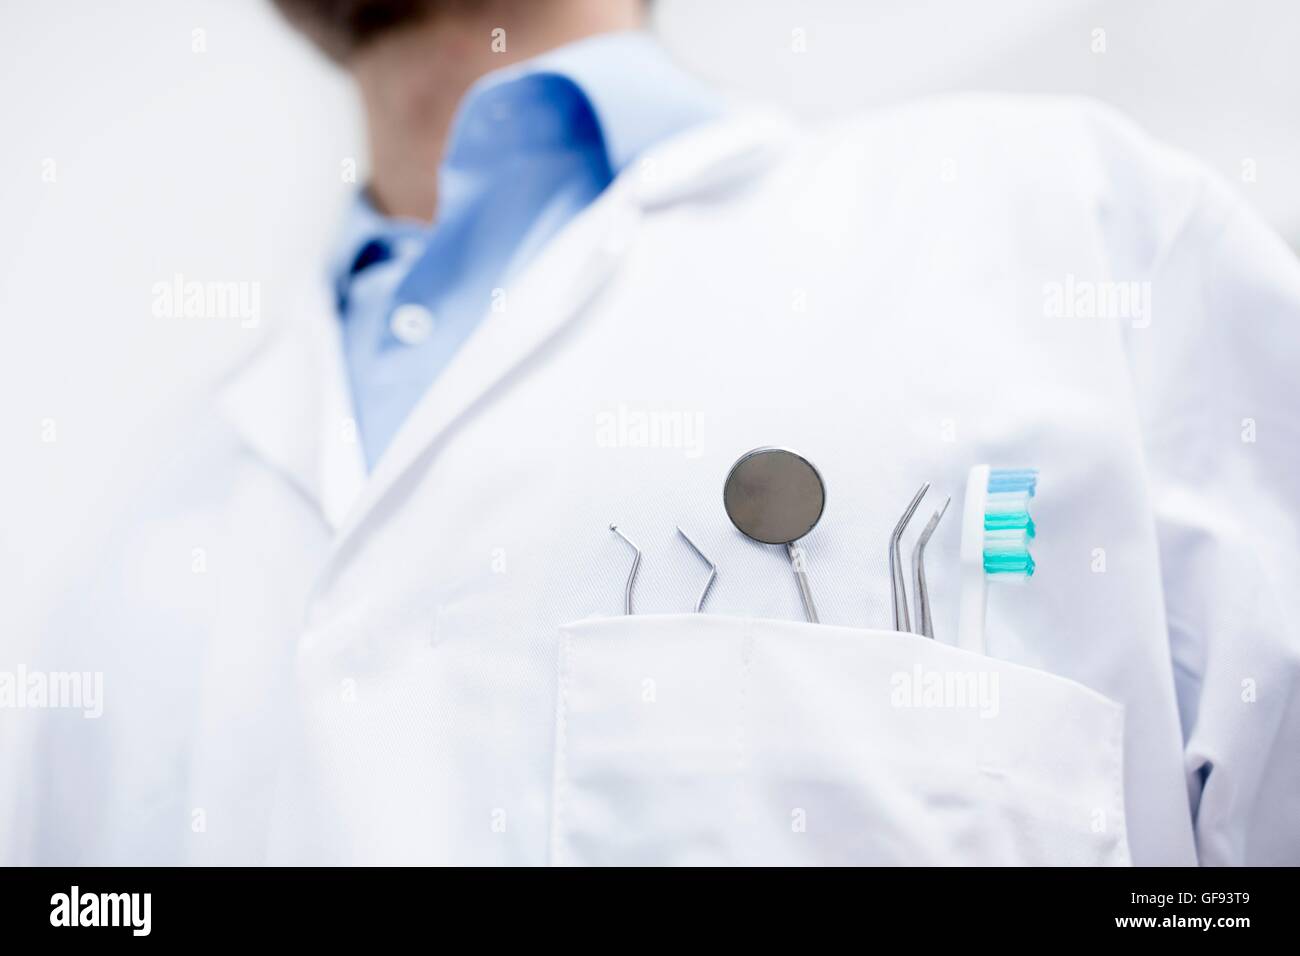 MODEL RELEASED. Close-up of dental equipment in doctor's pocket. Stock Photo